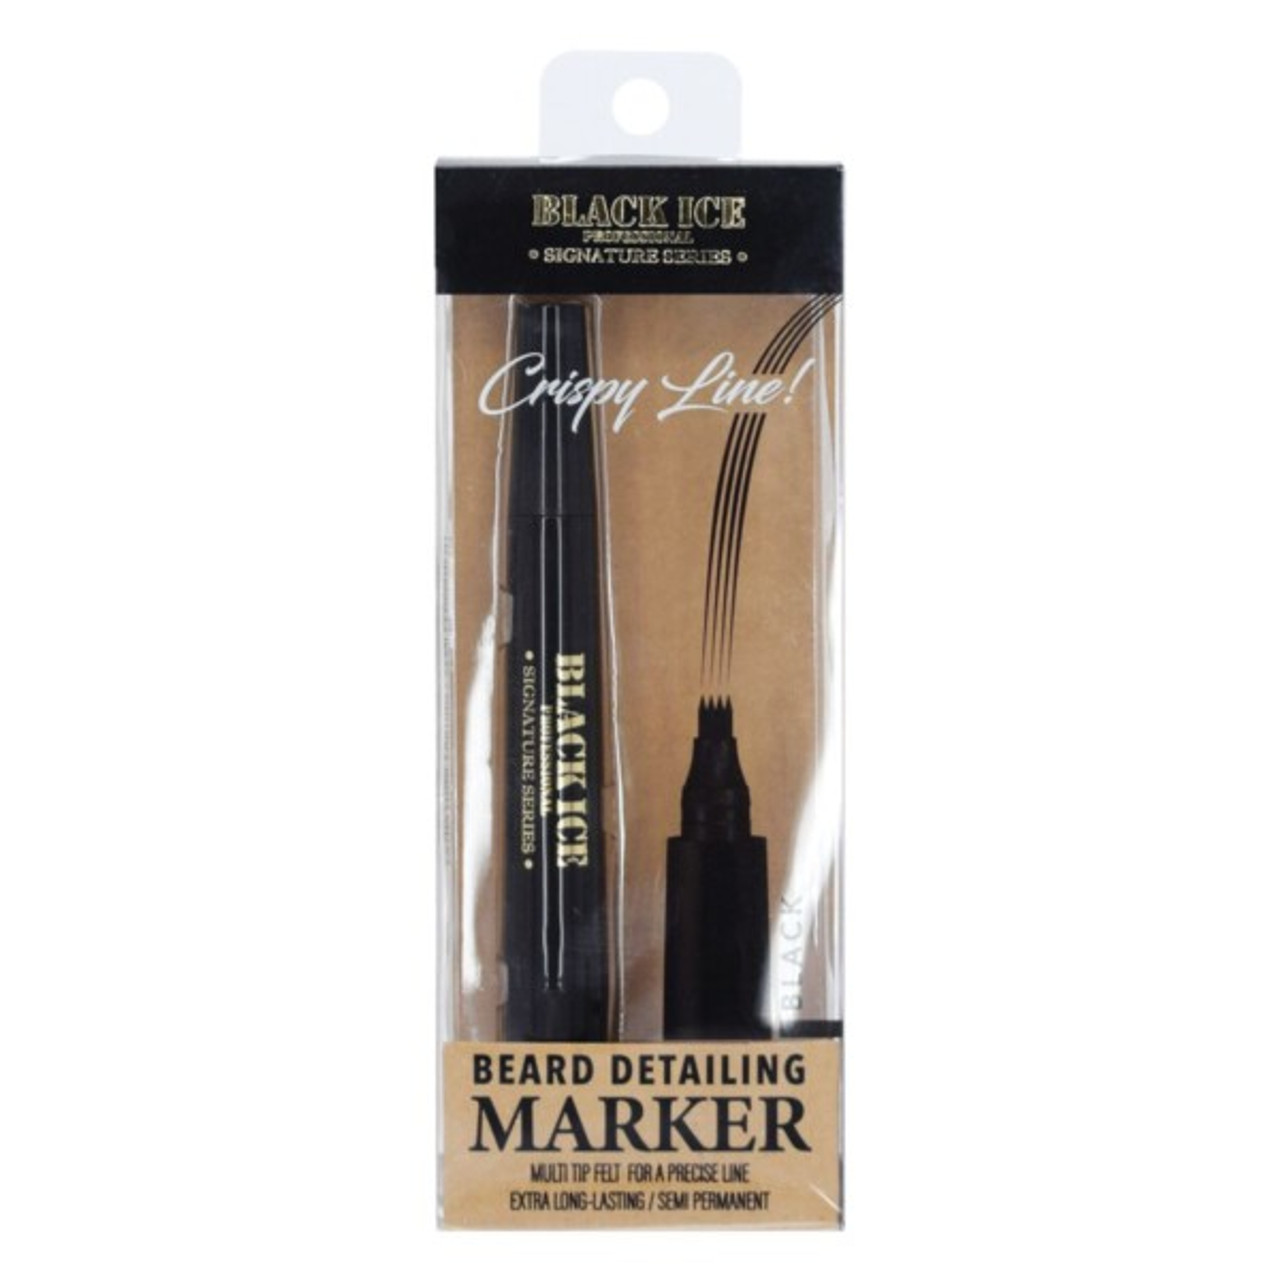 BlackIce Barber Pencil - White - Ideal Barber Supply